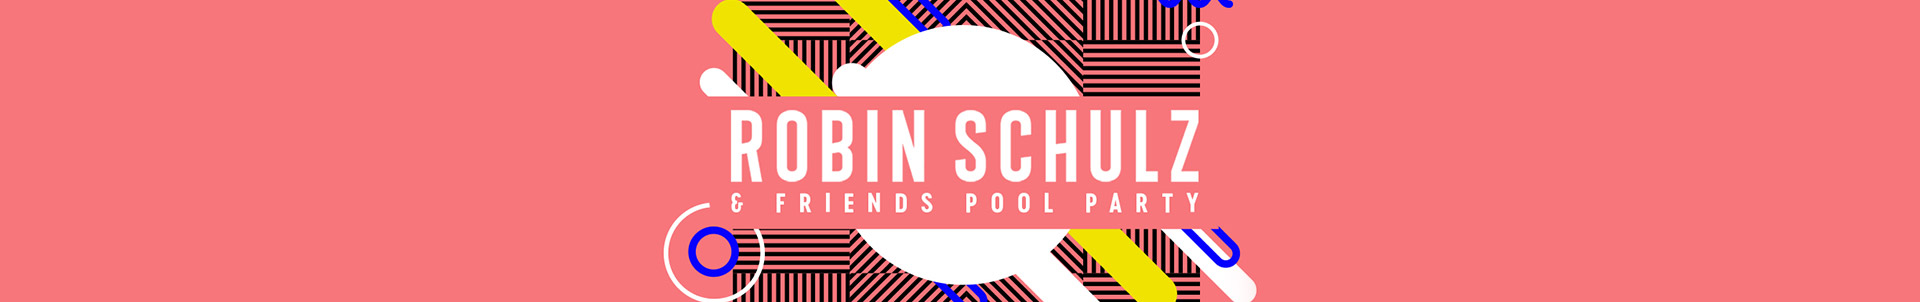 First names Robin Schulz' Miami pool party announced